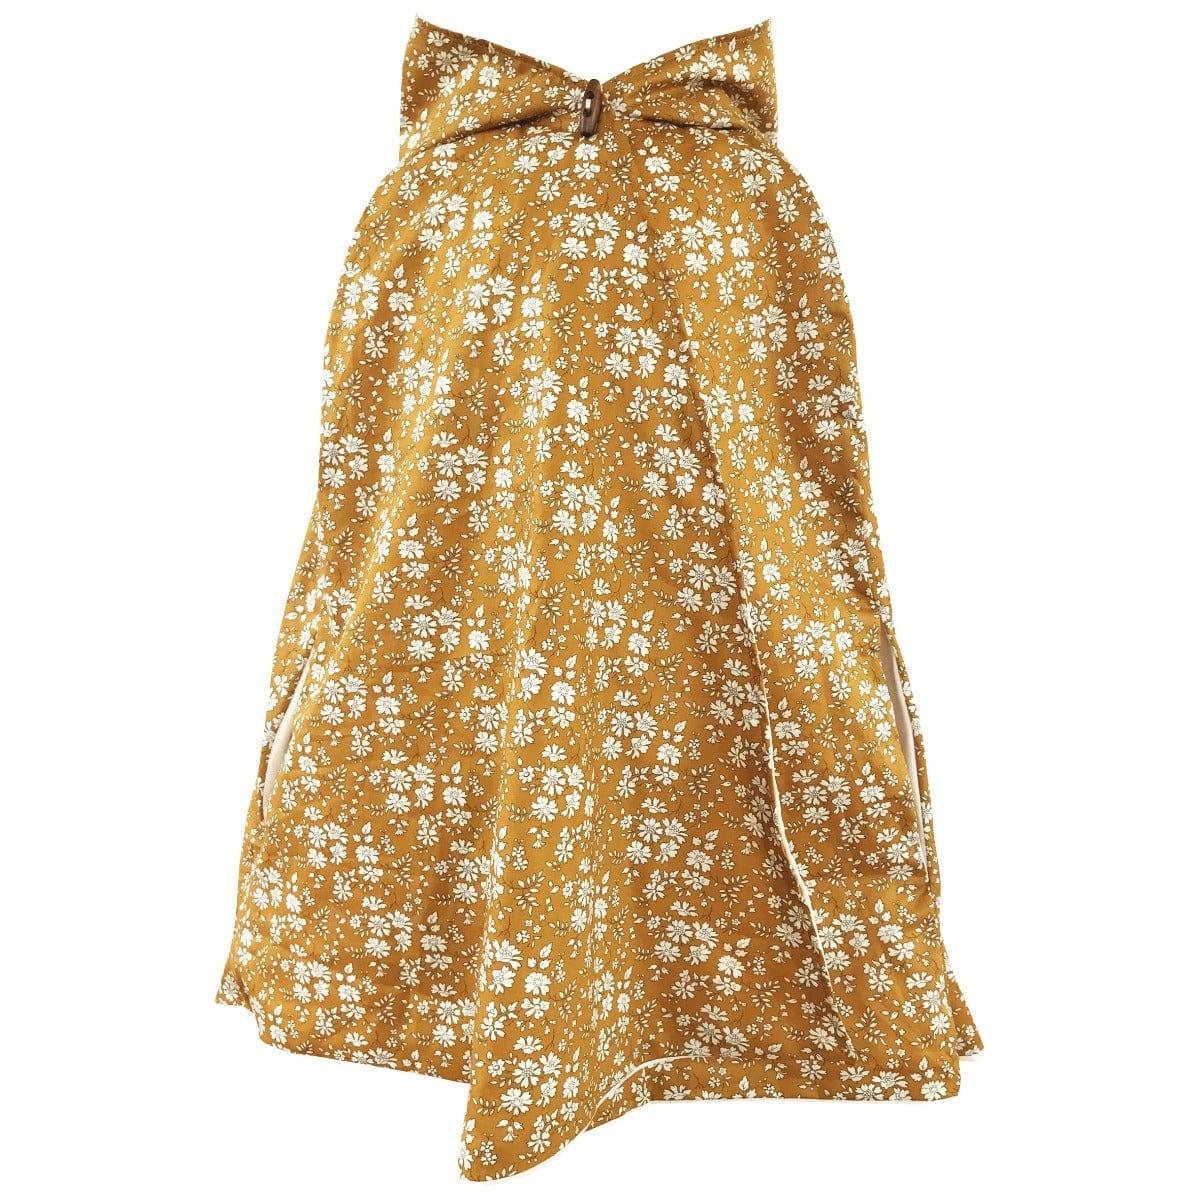 Fable Heart Hooded Cape made with Liberty Fabric CAPEL MUSTARD - Coco & Wolf